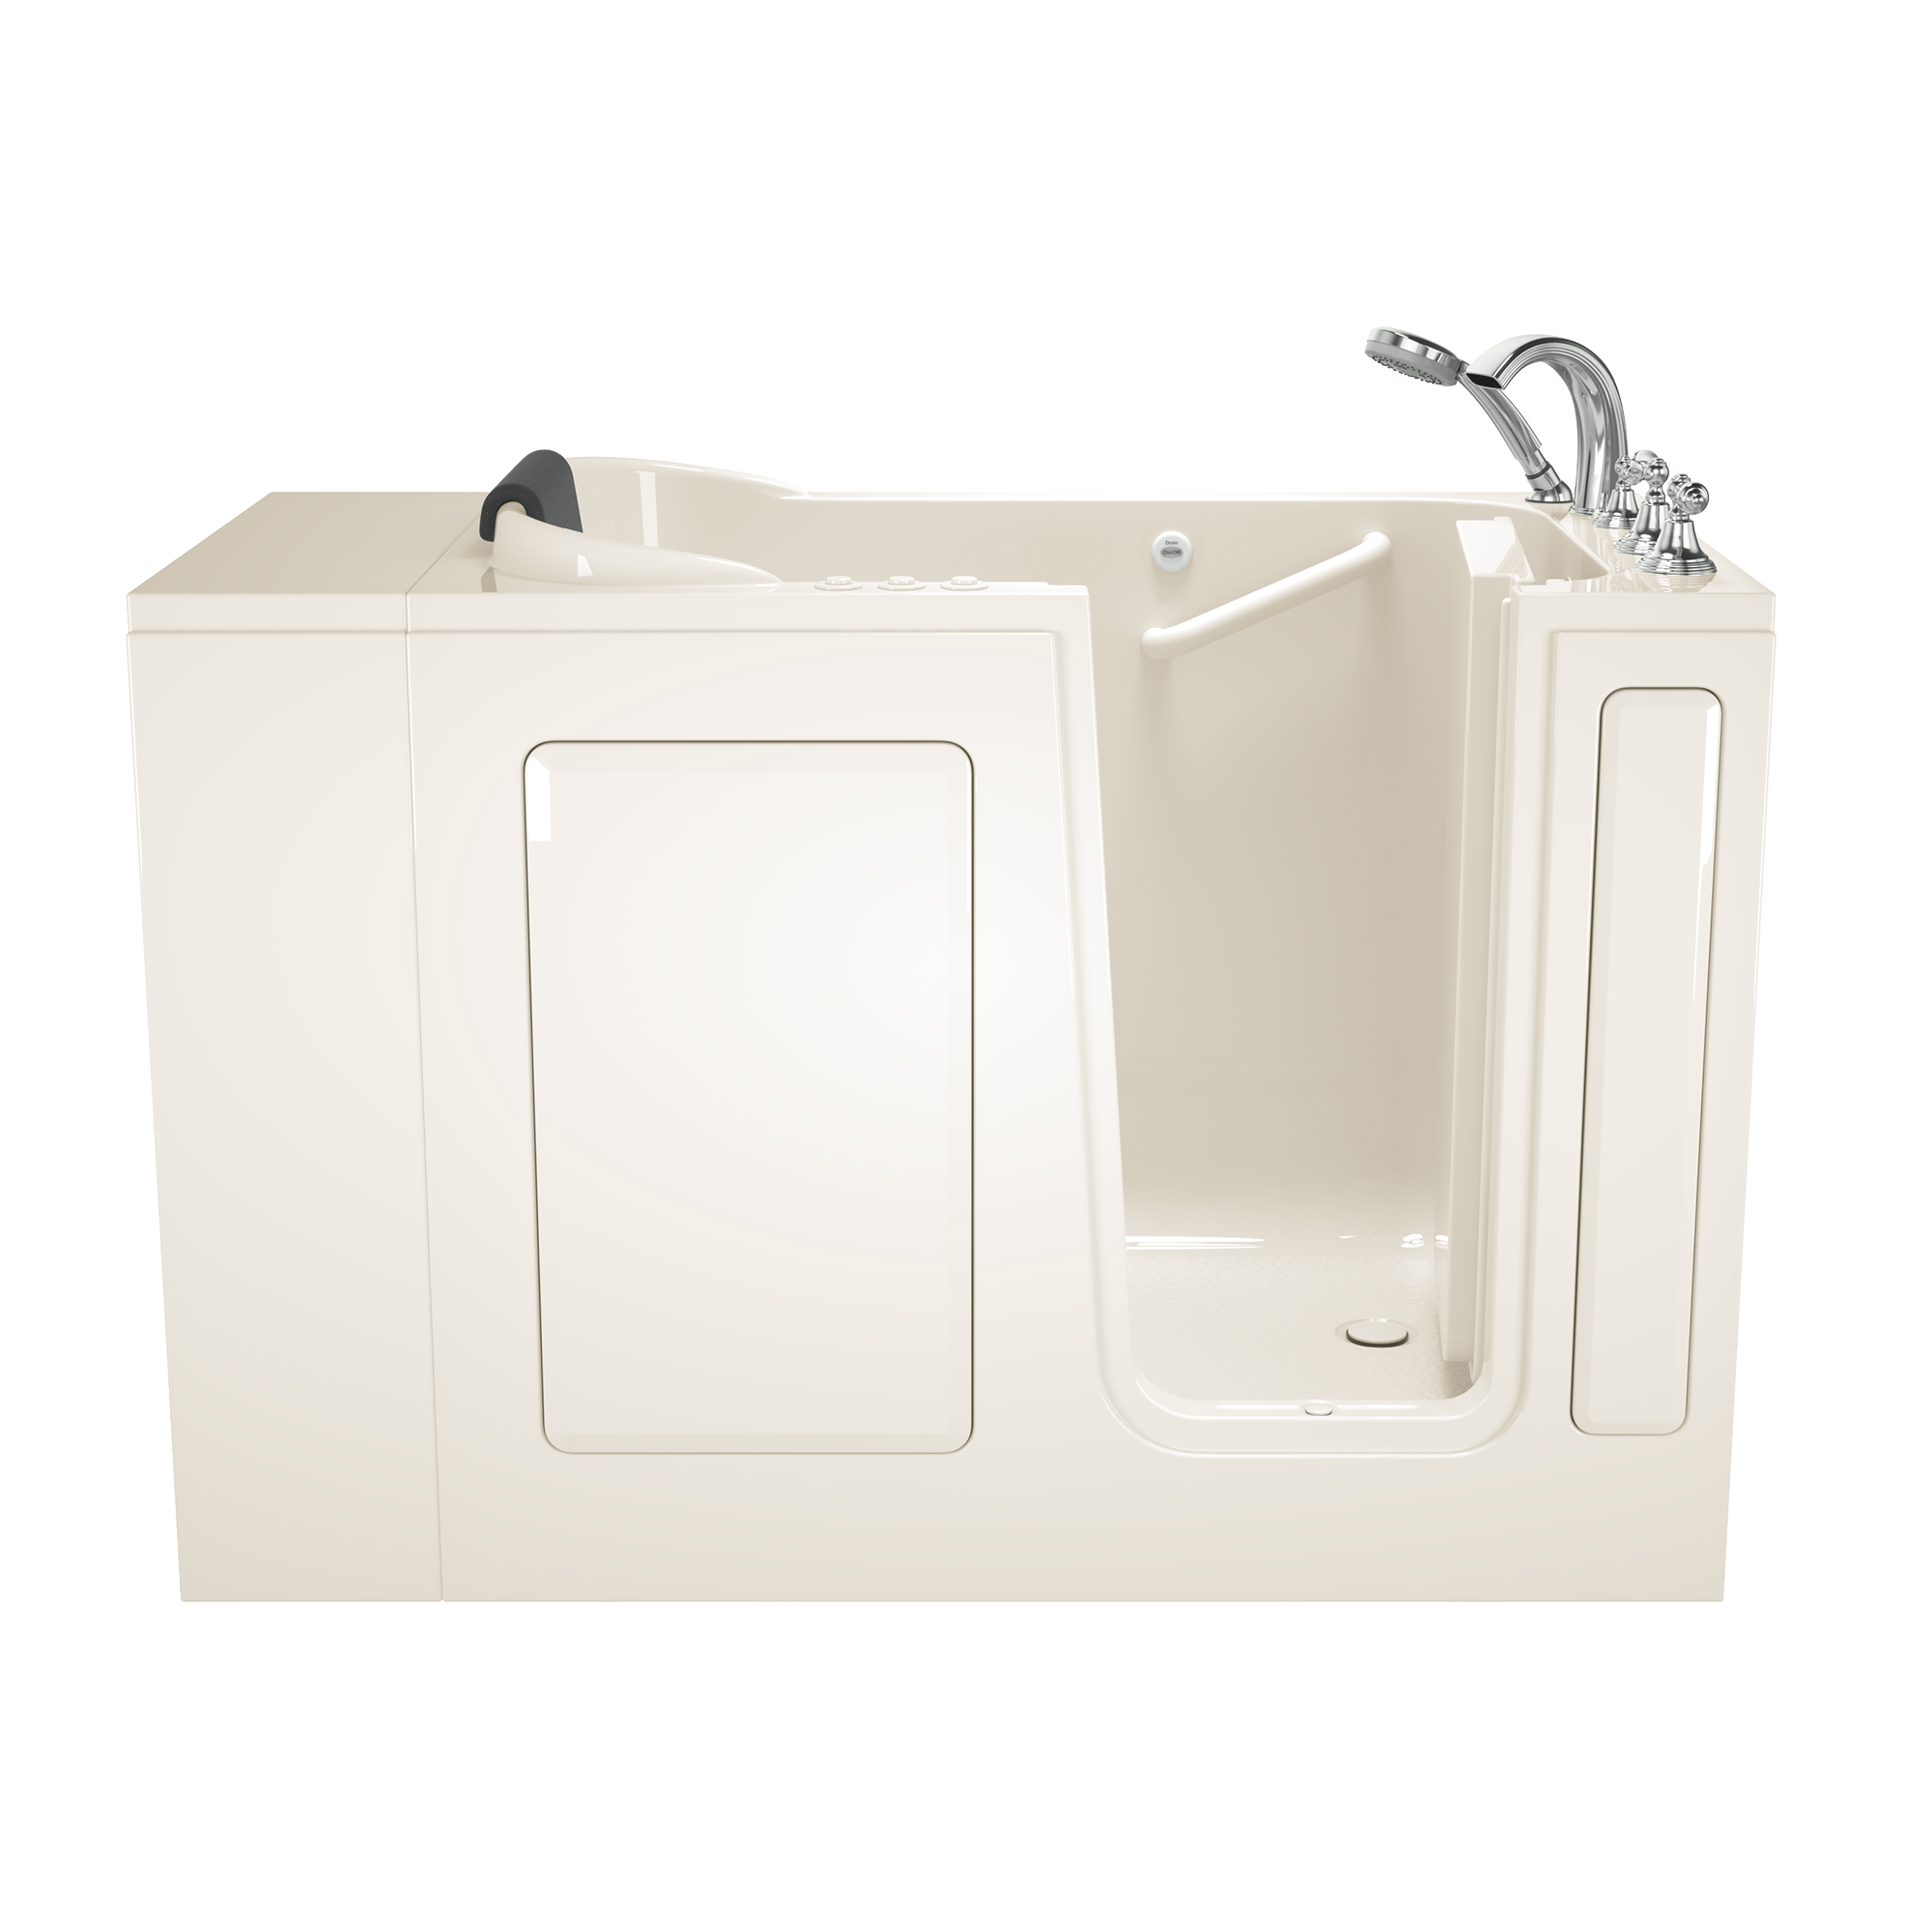 Gelcoat Premium Series 28 x 48 Inch Walk in Tub With Combination Air Spa and Whirlpool Systems   Right Hand Drain With Faucet WIB LINEN